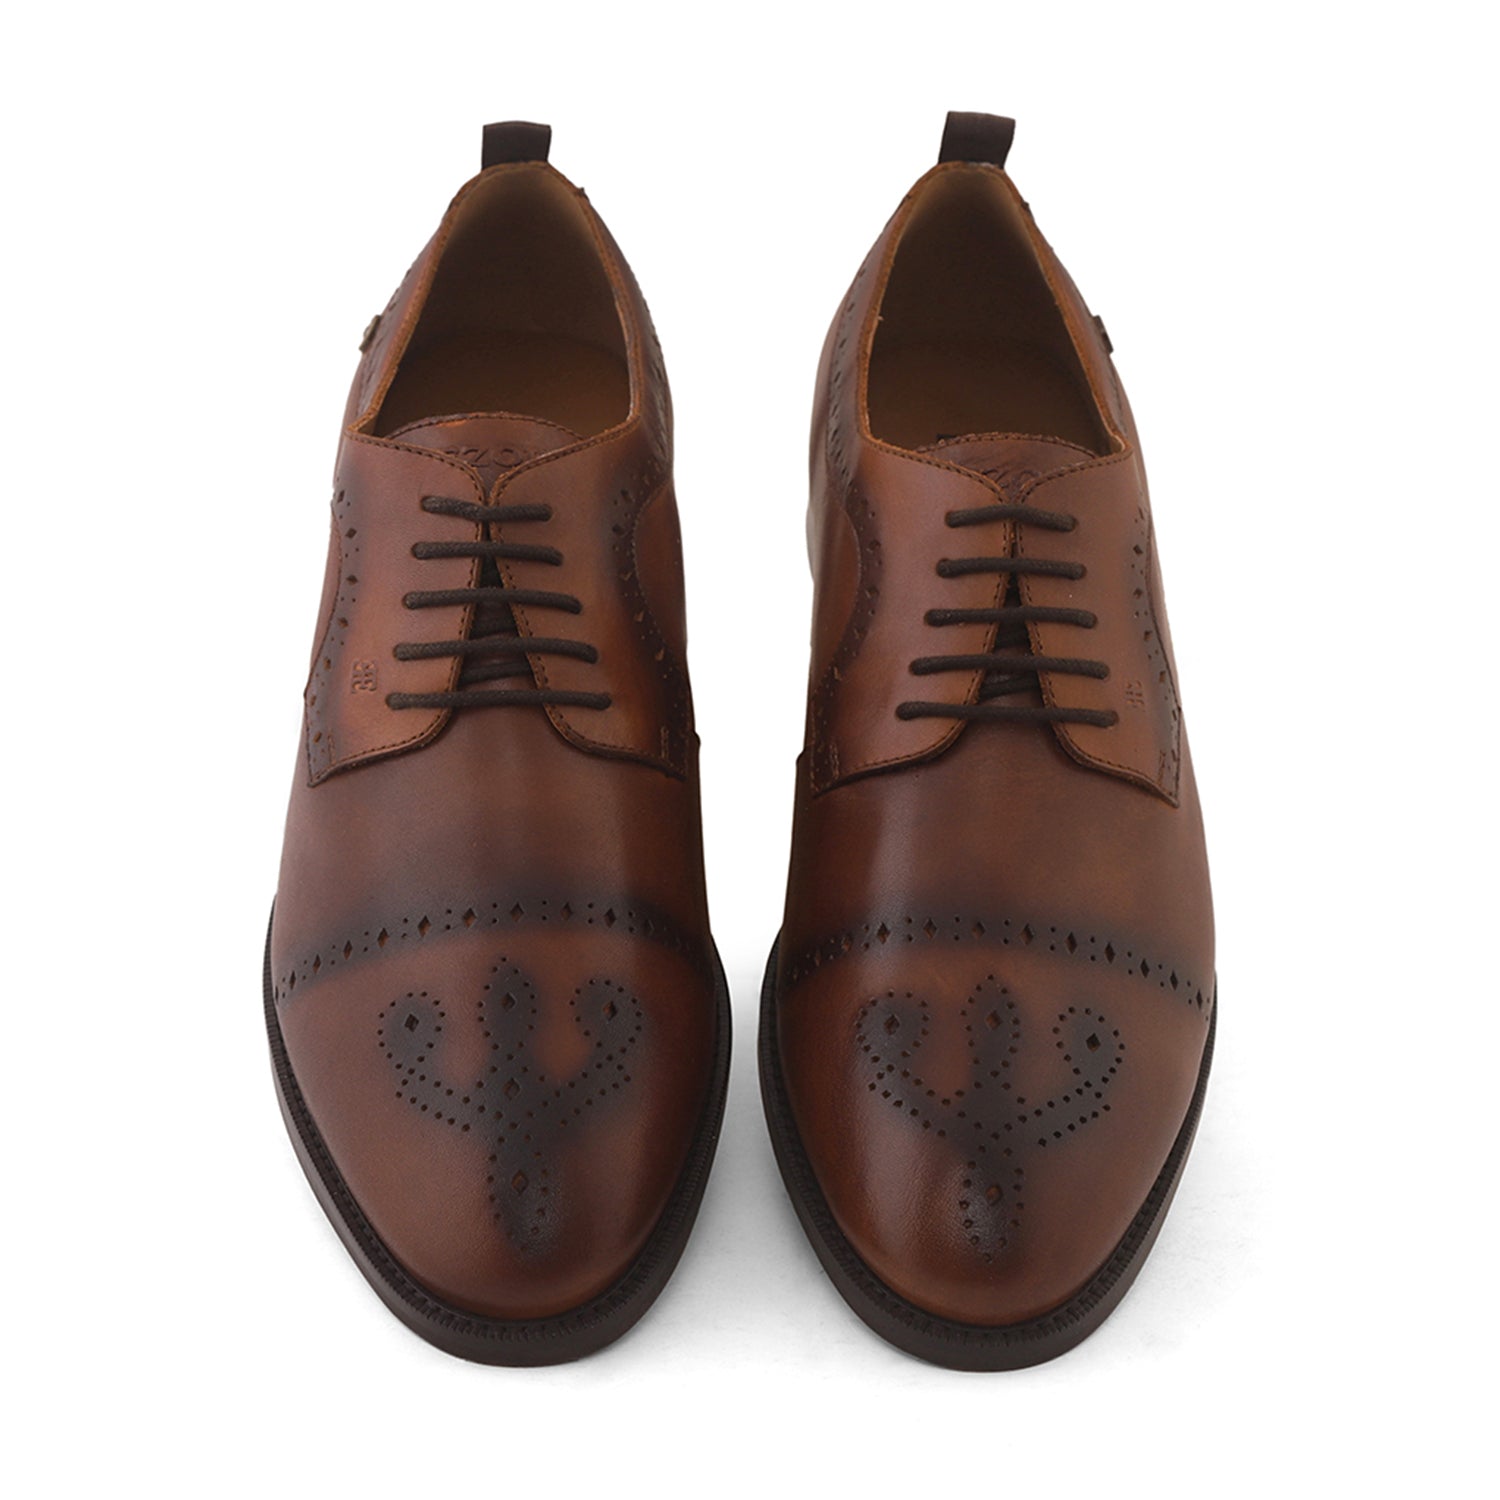 Ezok Men Tan Burnish Finish Perforated Leather Derby Shoes